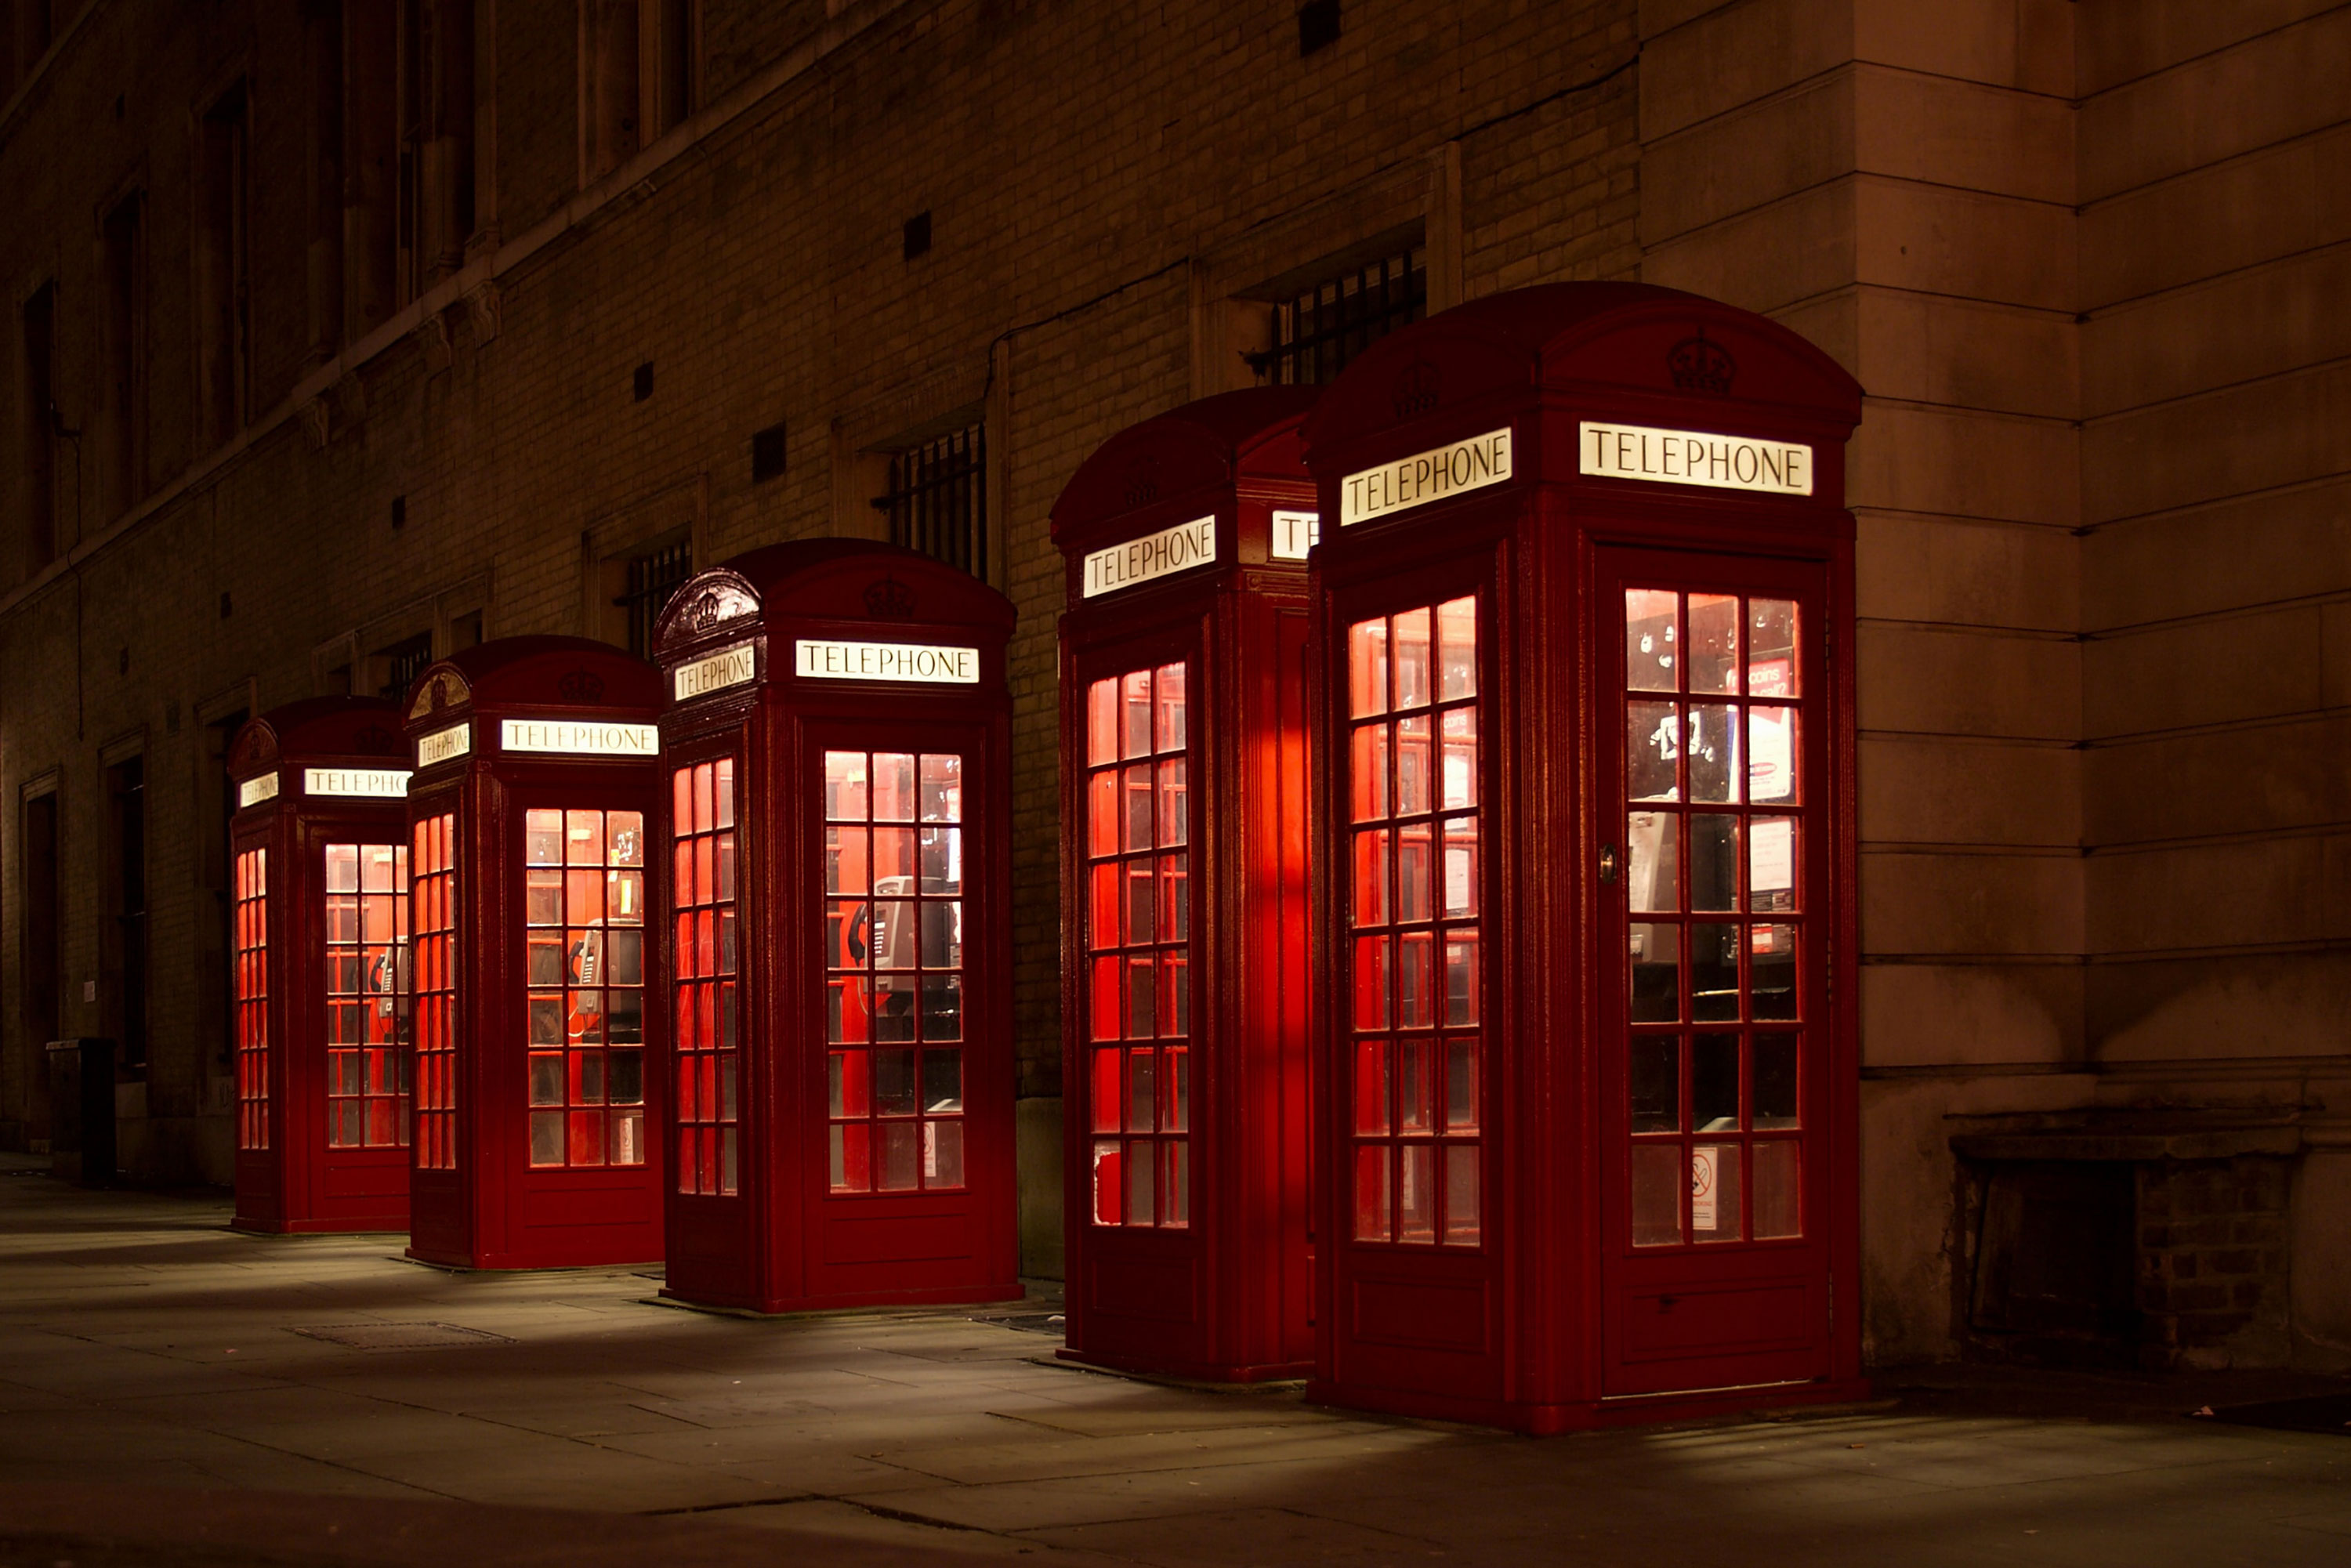 Row of red telephone boxes